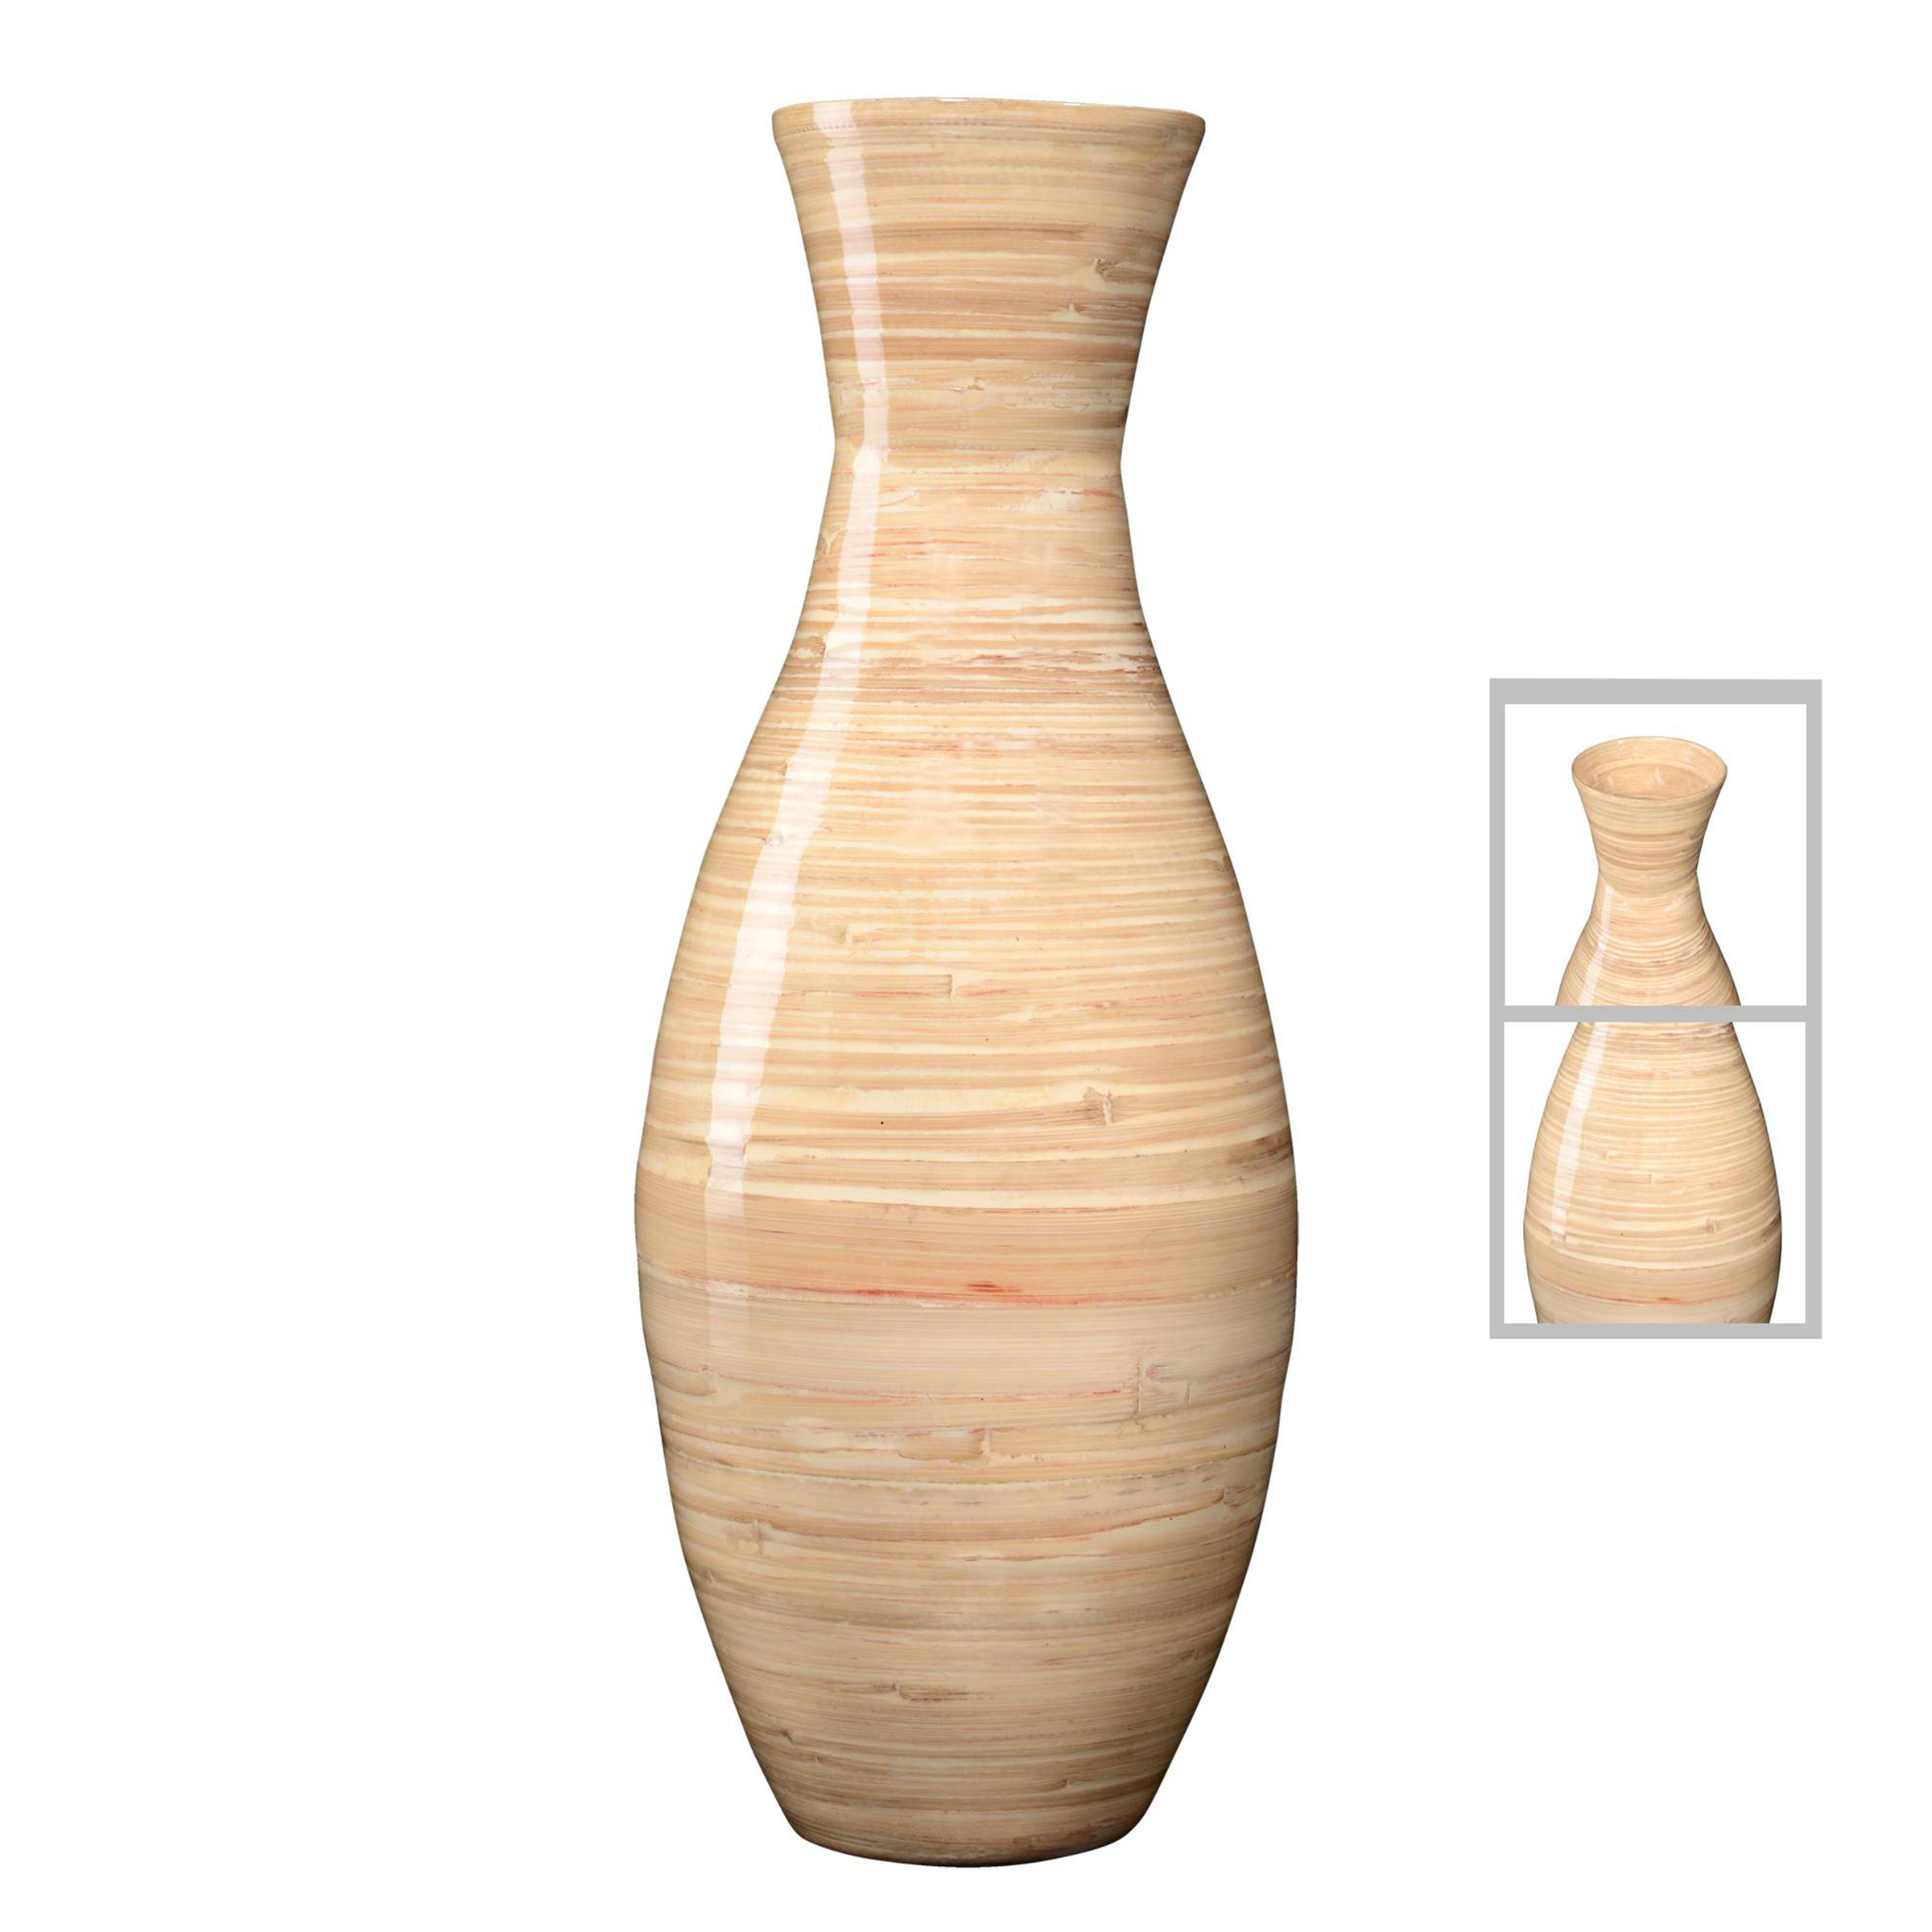 Villacera Handcrafted 20-Inch-Tall Sustainable Bamboo Floor Vase (Natural) - image 5 of 6